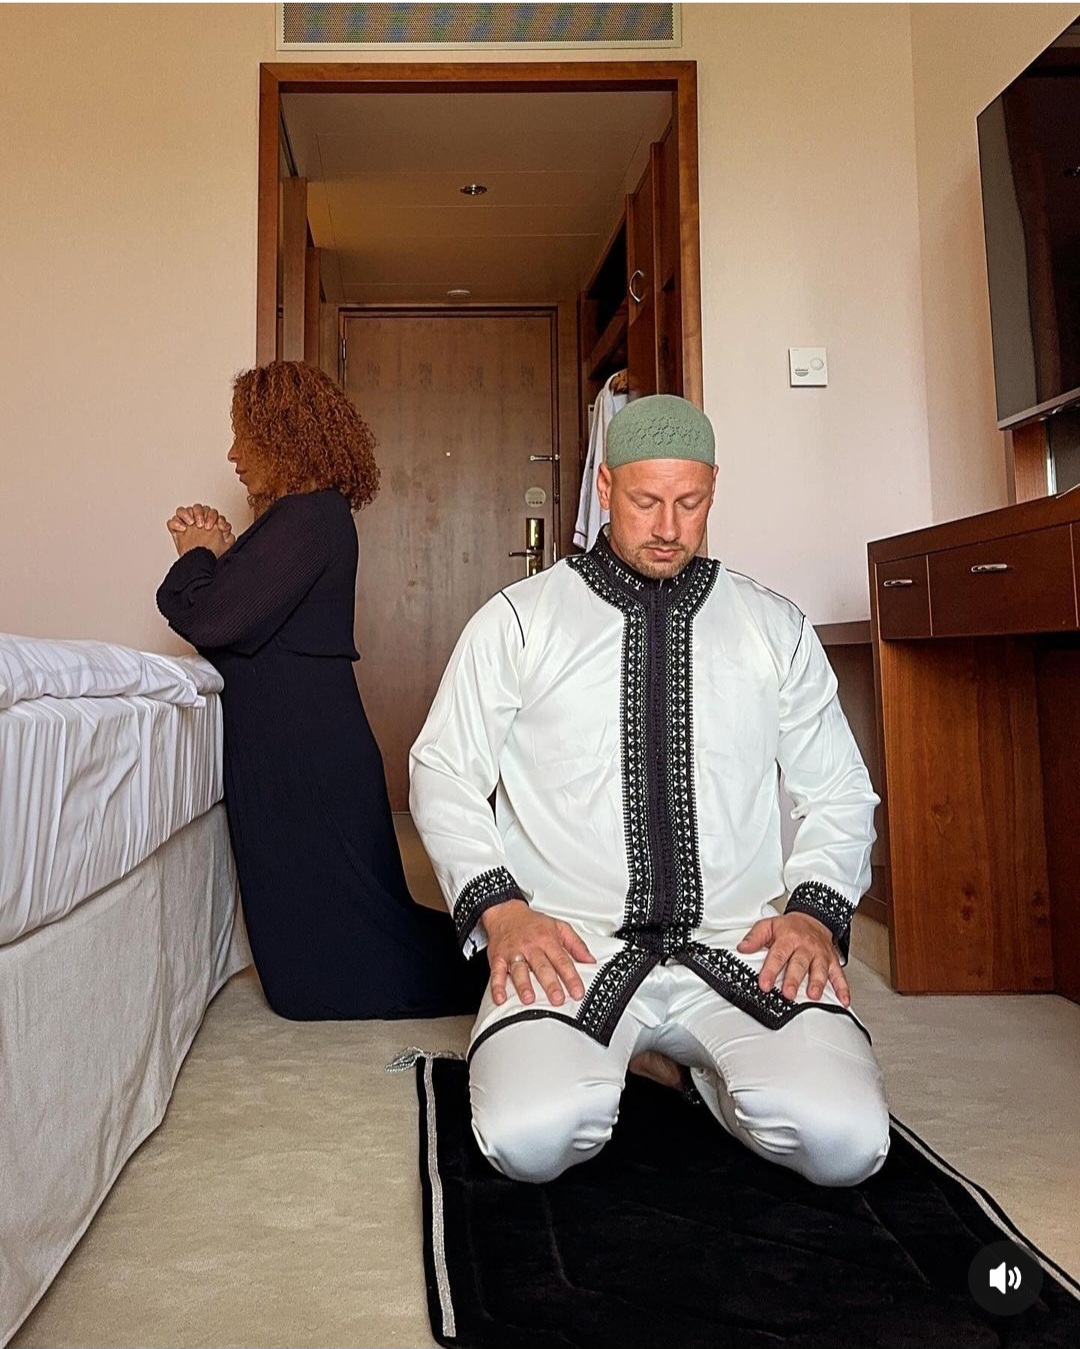 "Islam forbids this kind of relationship.  Your marriage is not legal in Islam." Muslim man criticised after sharing photos of him and his Christian wife praying in different ways